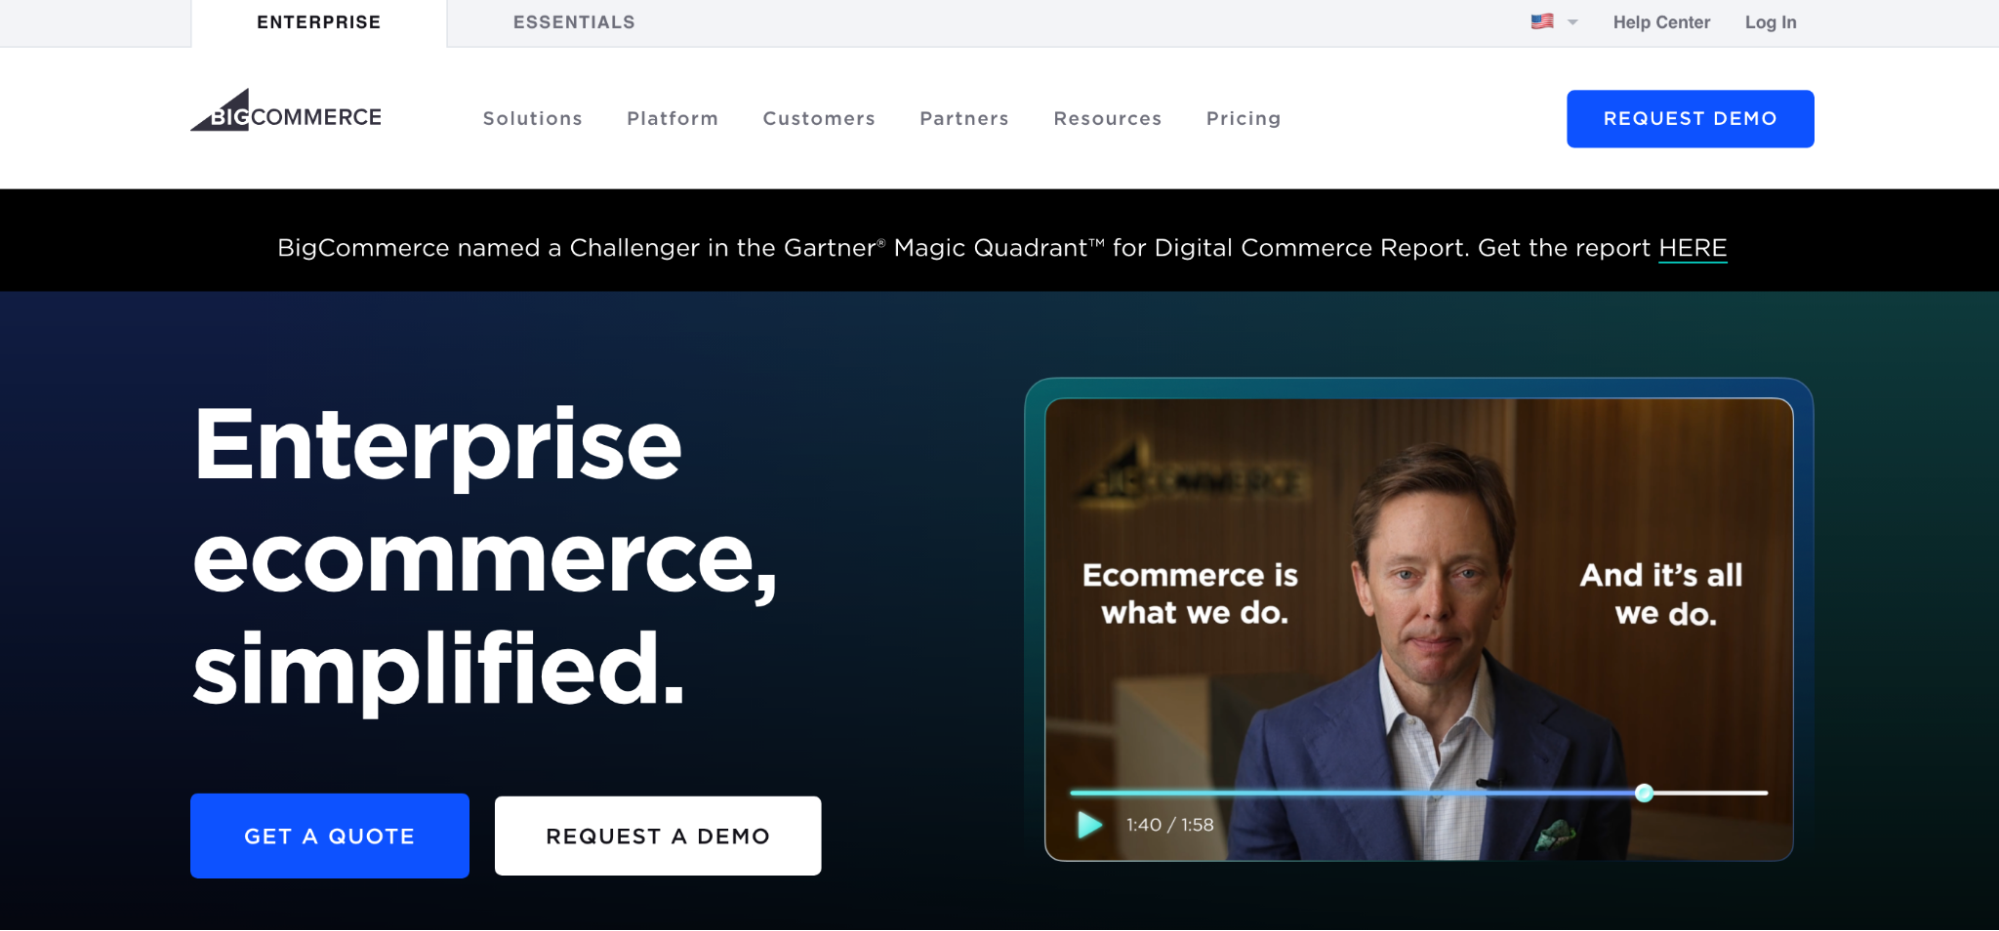 BigCommerce homepage with buttons next to a video showing a person wearing a suit speaking to the camera.